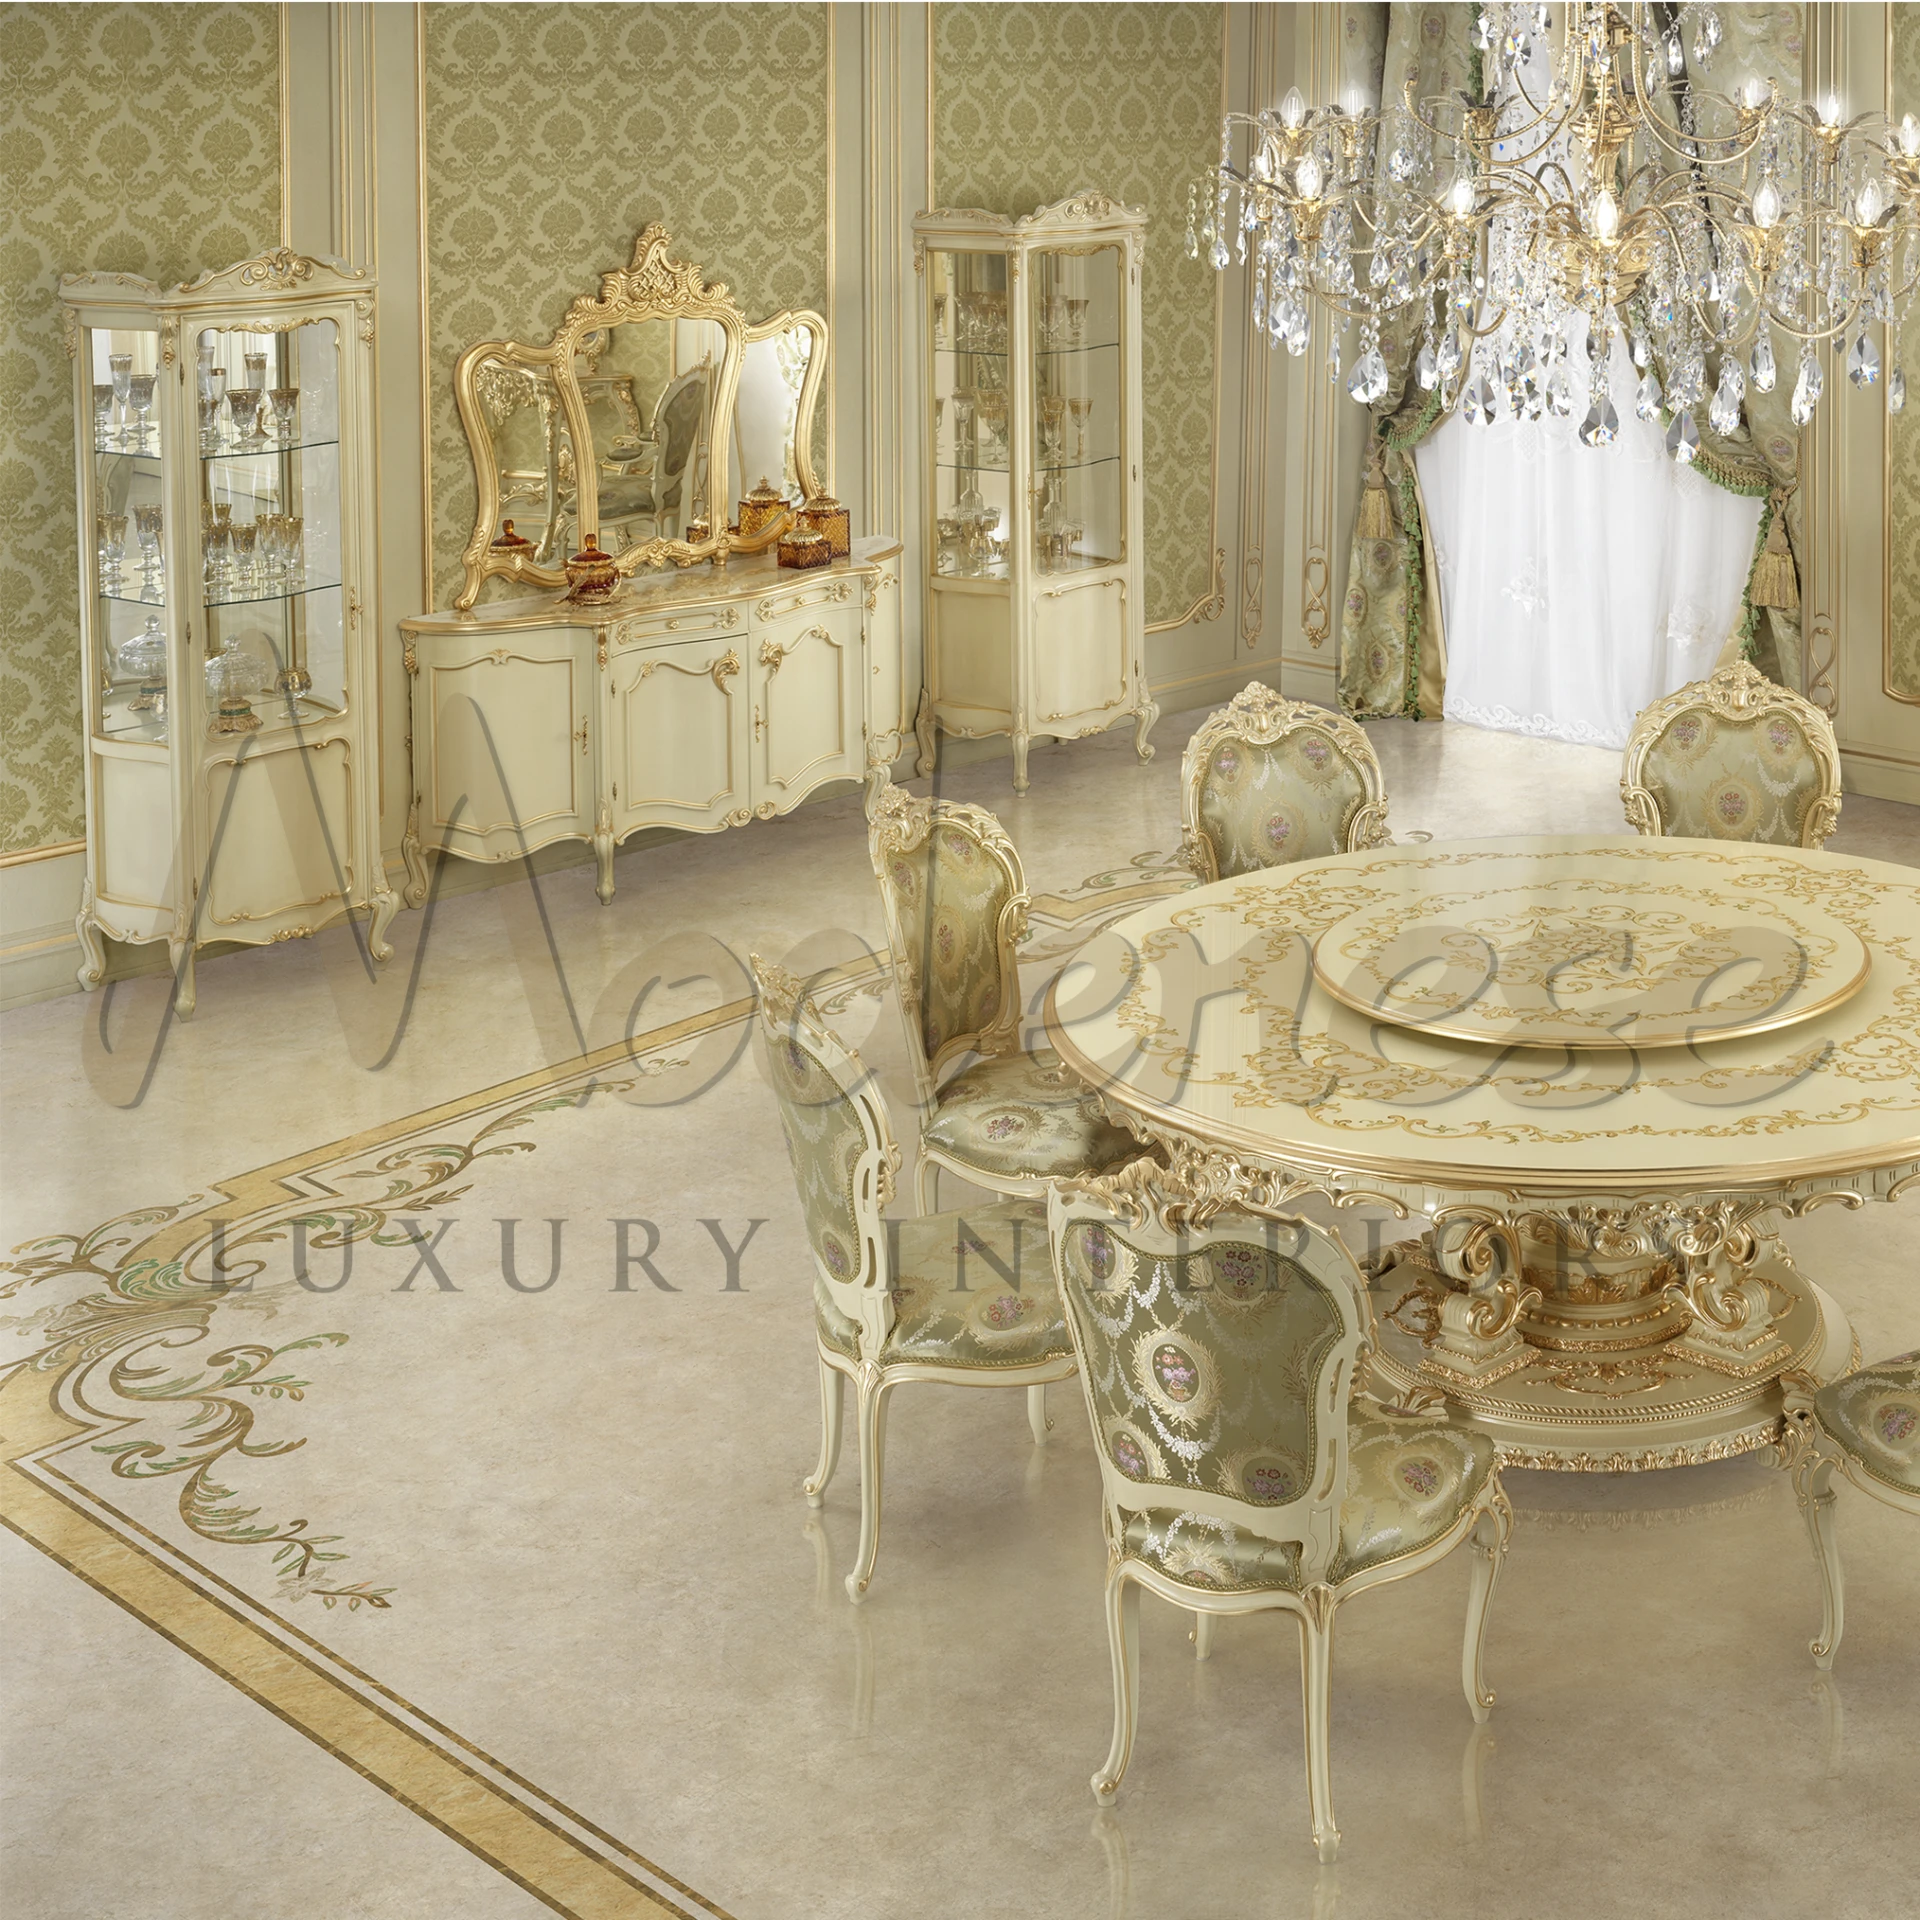 Sumptuous Classic Creame dining room set with a round table, ornate chairs, and matching display cabinets under an elegant crystal chandelier.